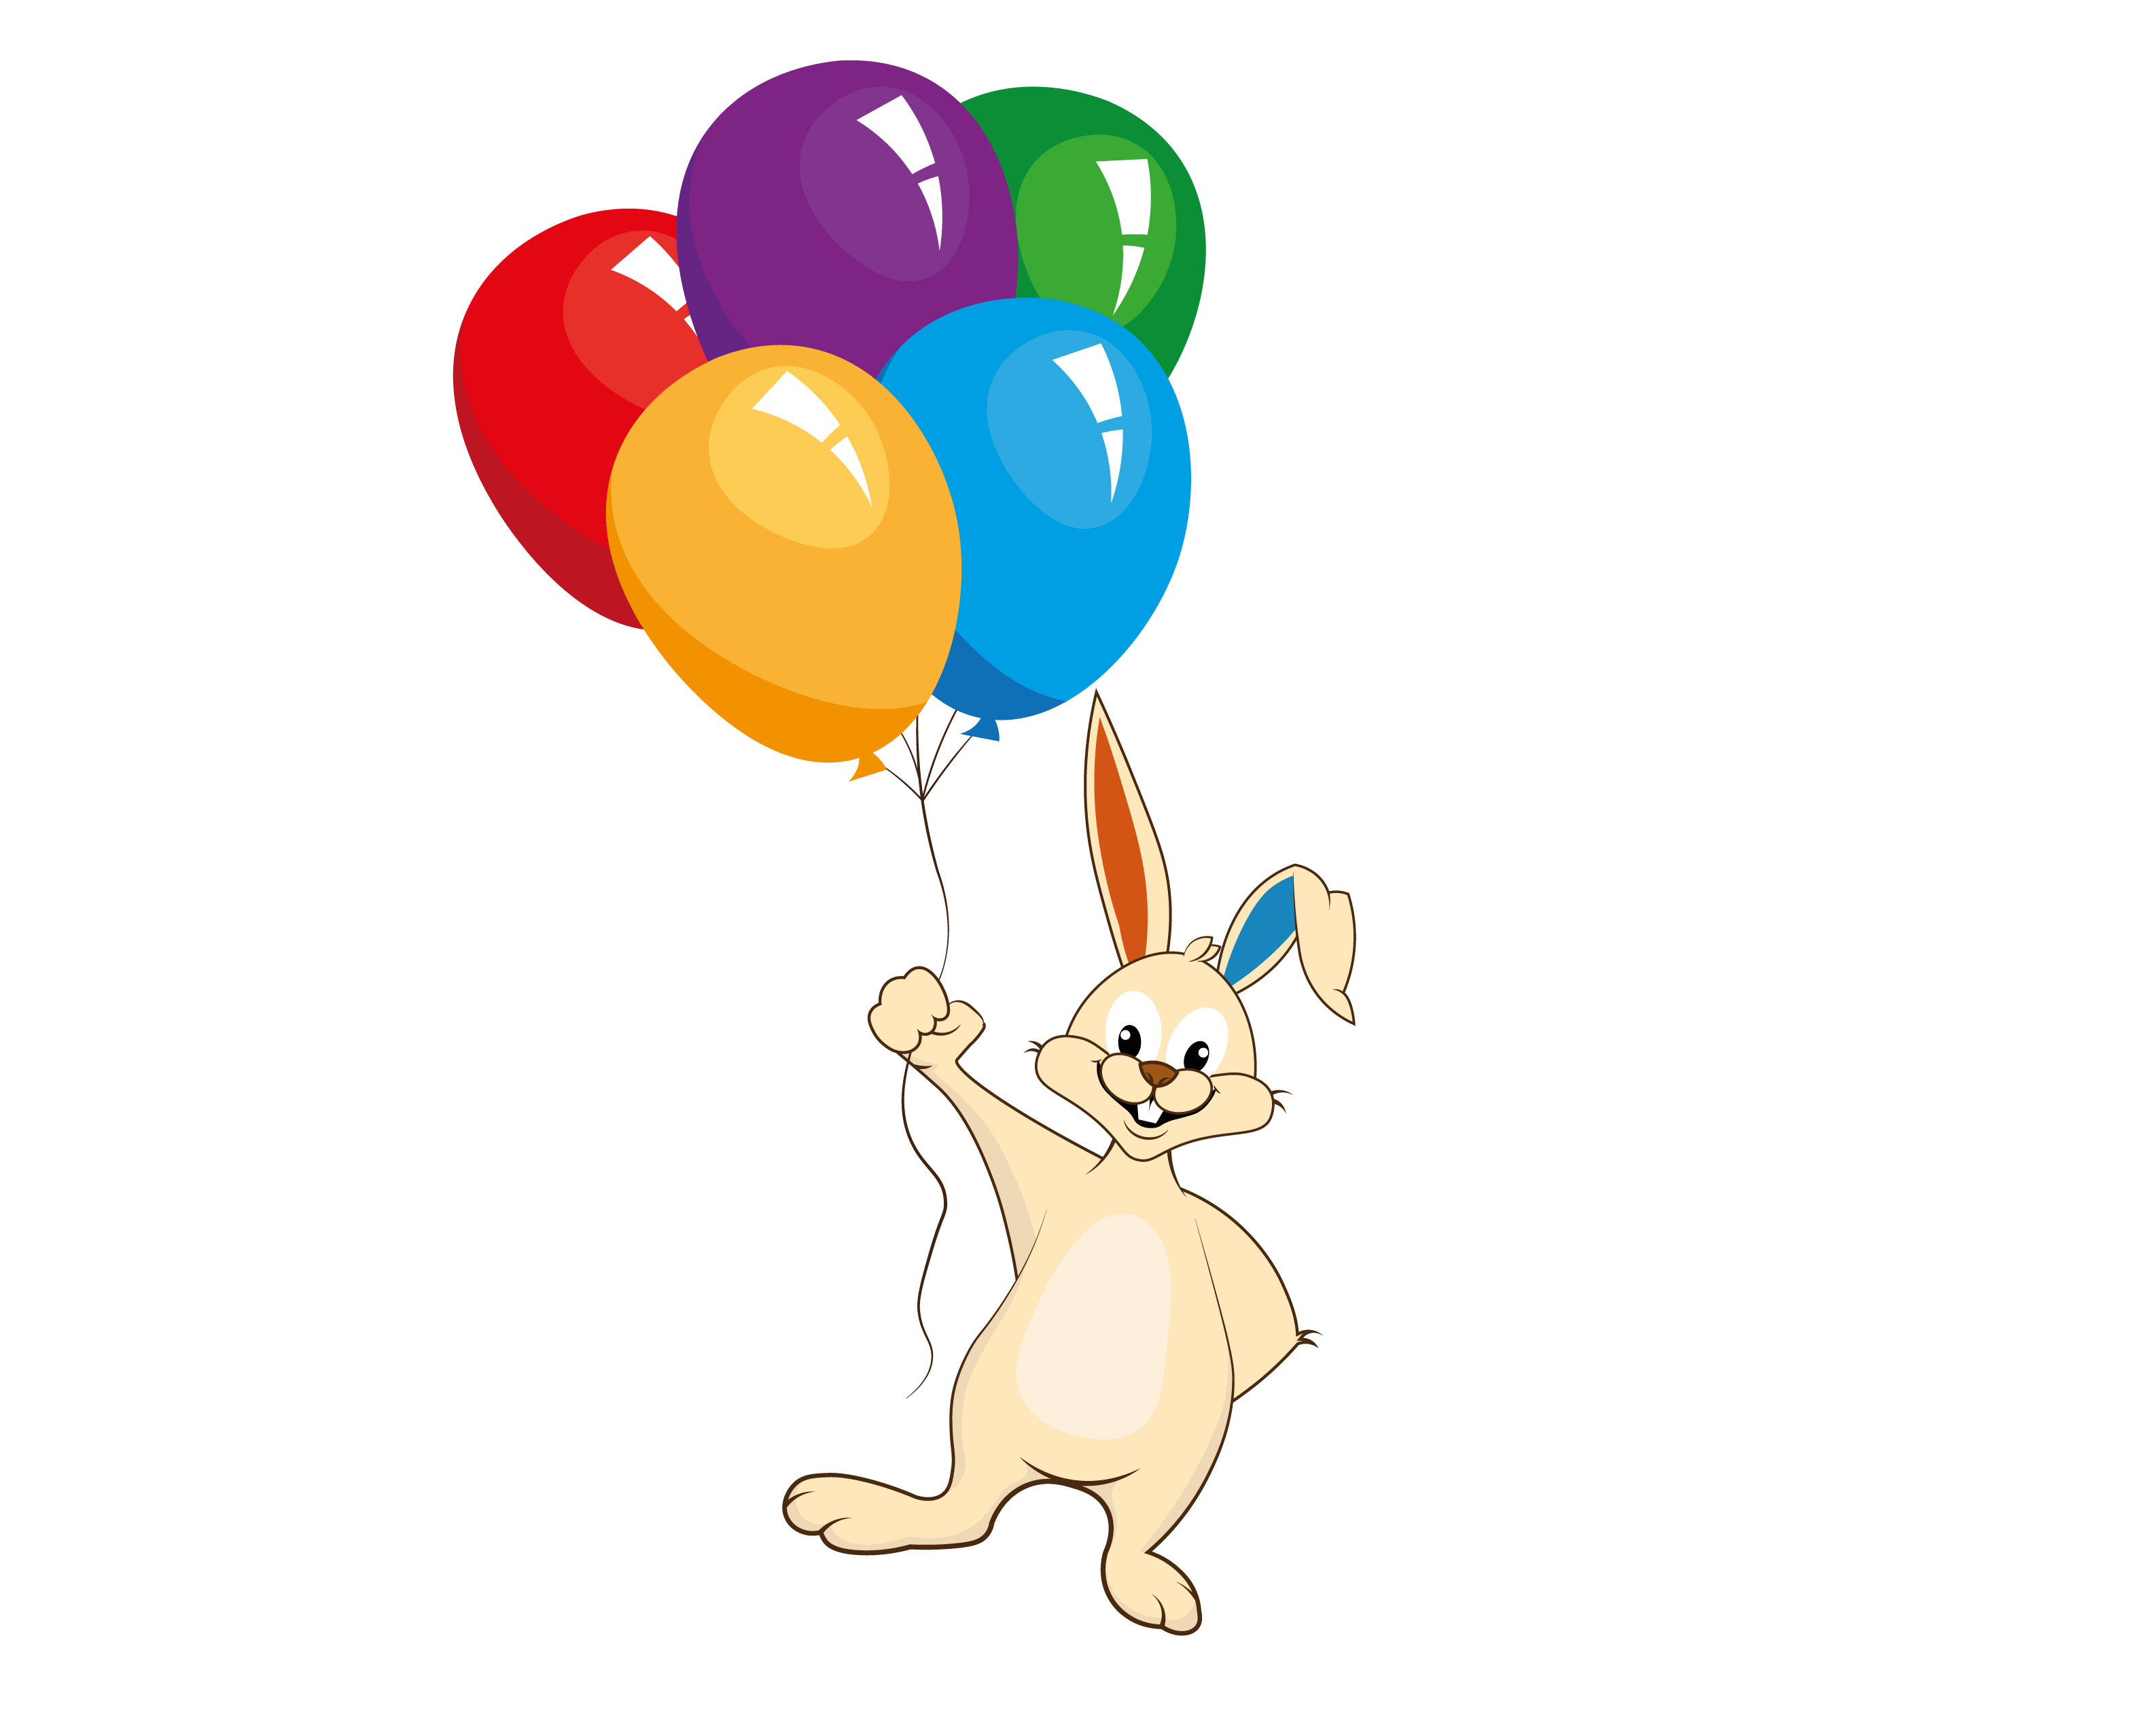 Rabbit with colorful balloons